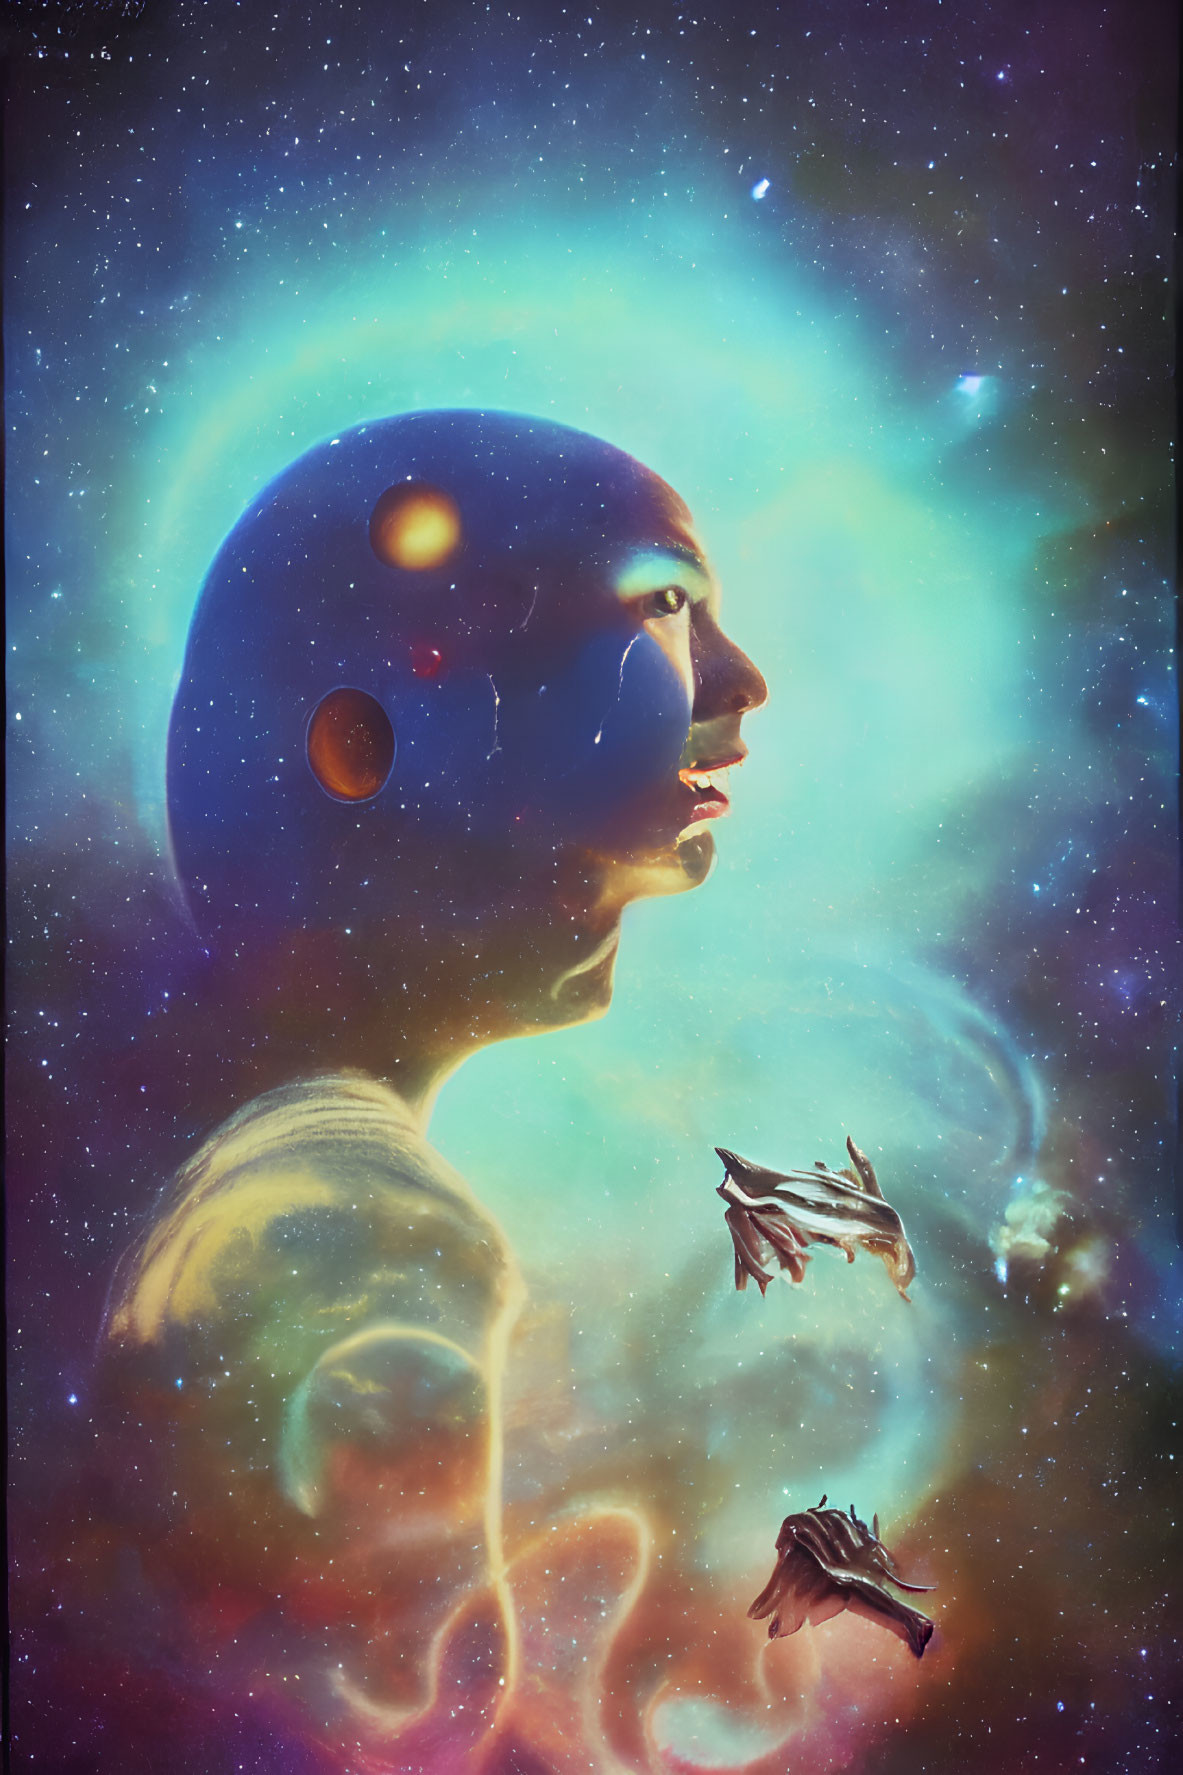 Surreal illustration of person with transparent head filled with stars and planets